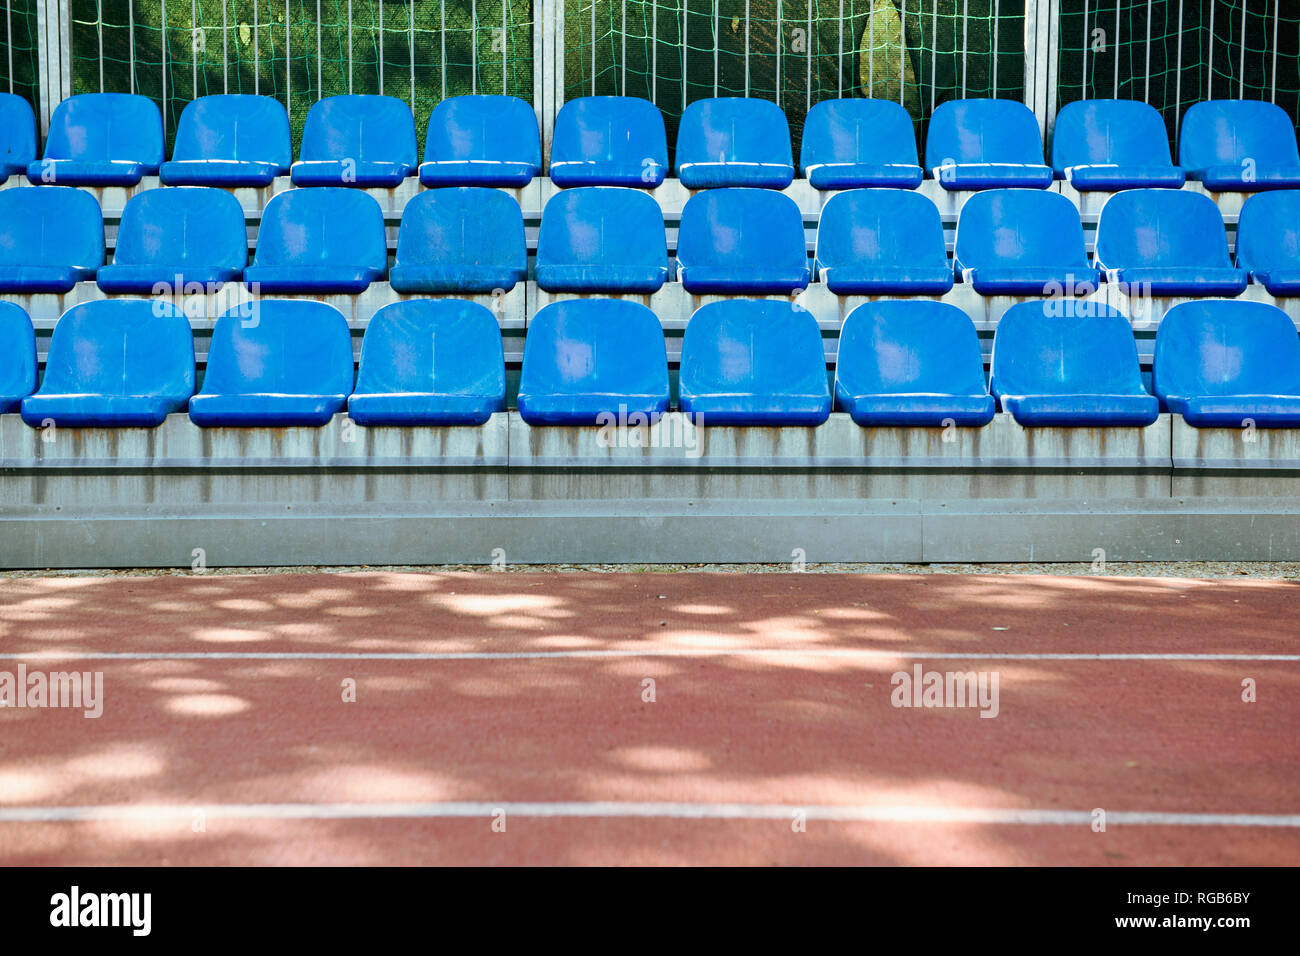 Empty blue seats in sport centre with athletic track Stock Photo